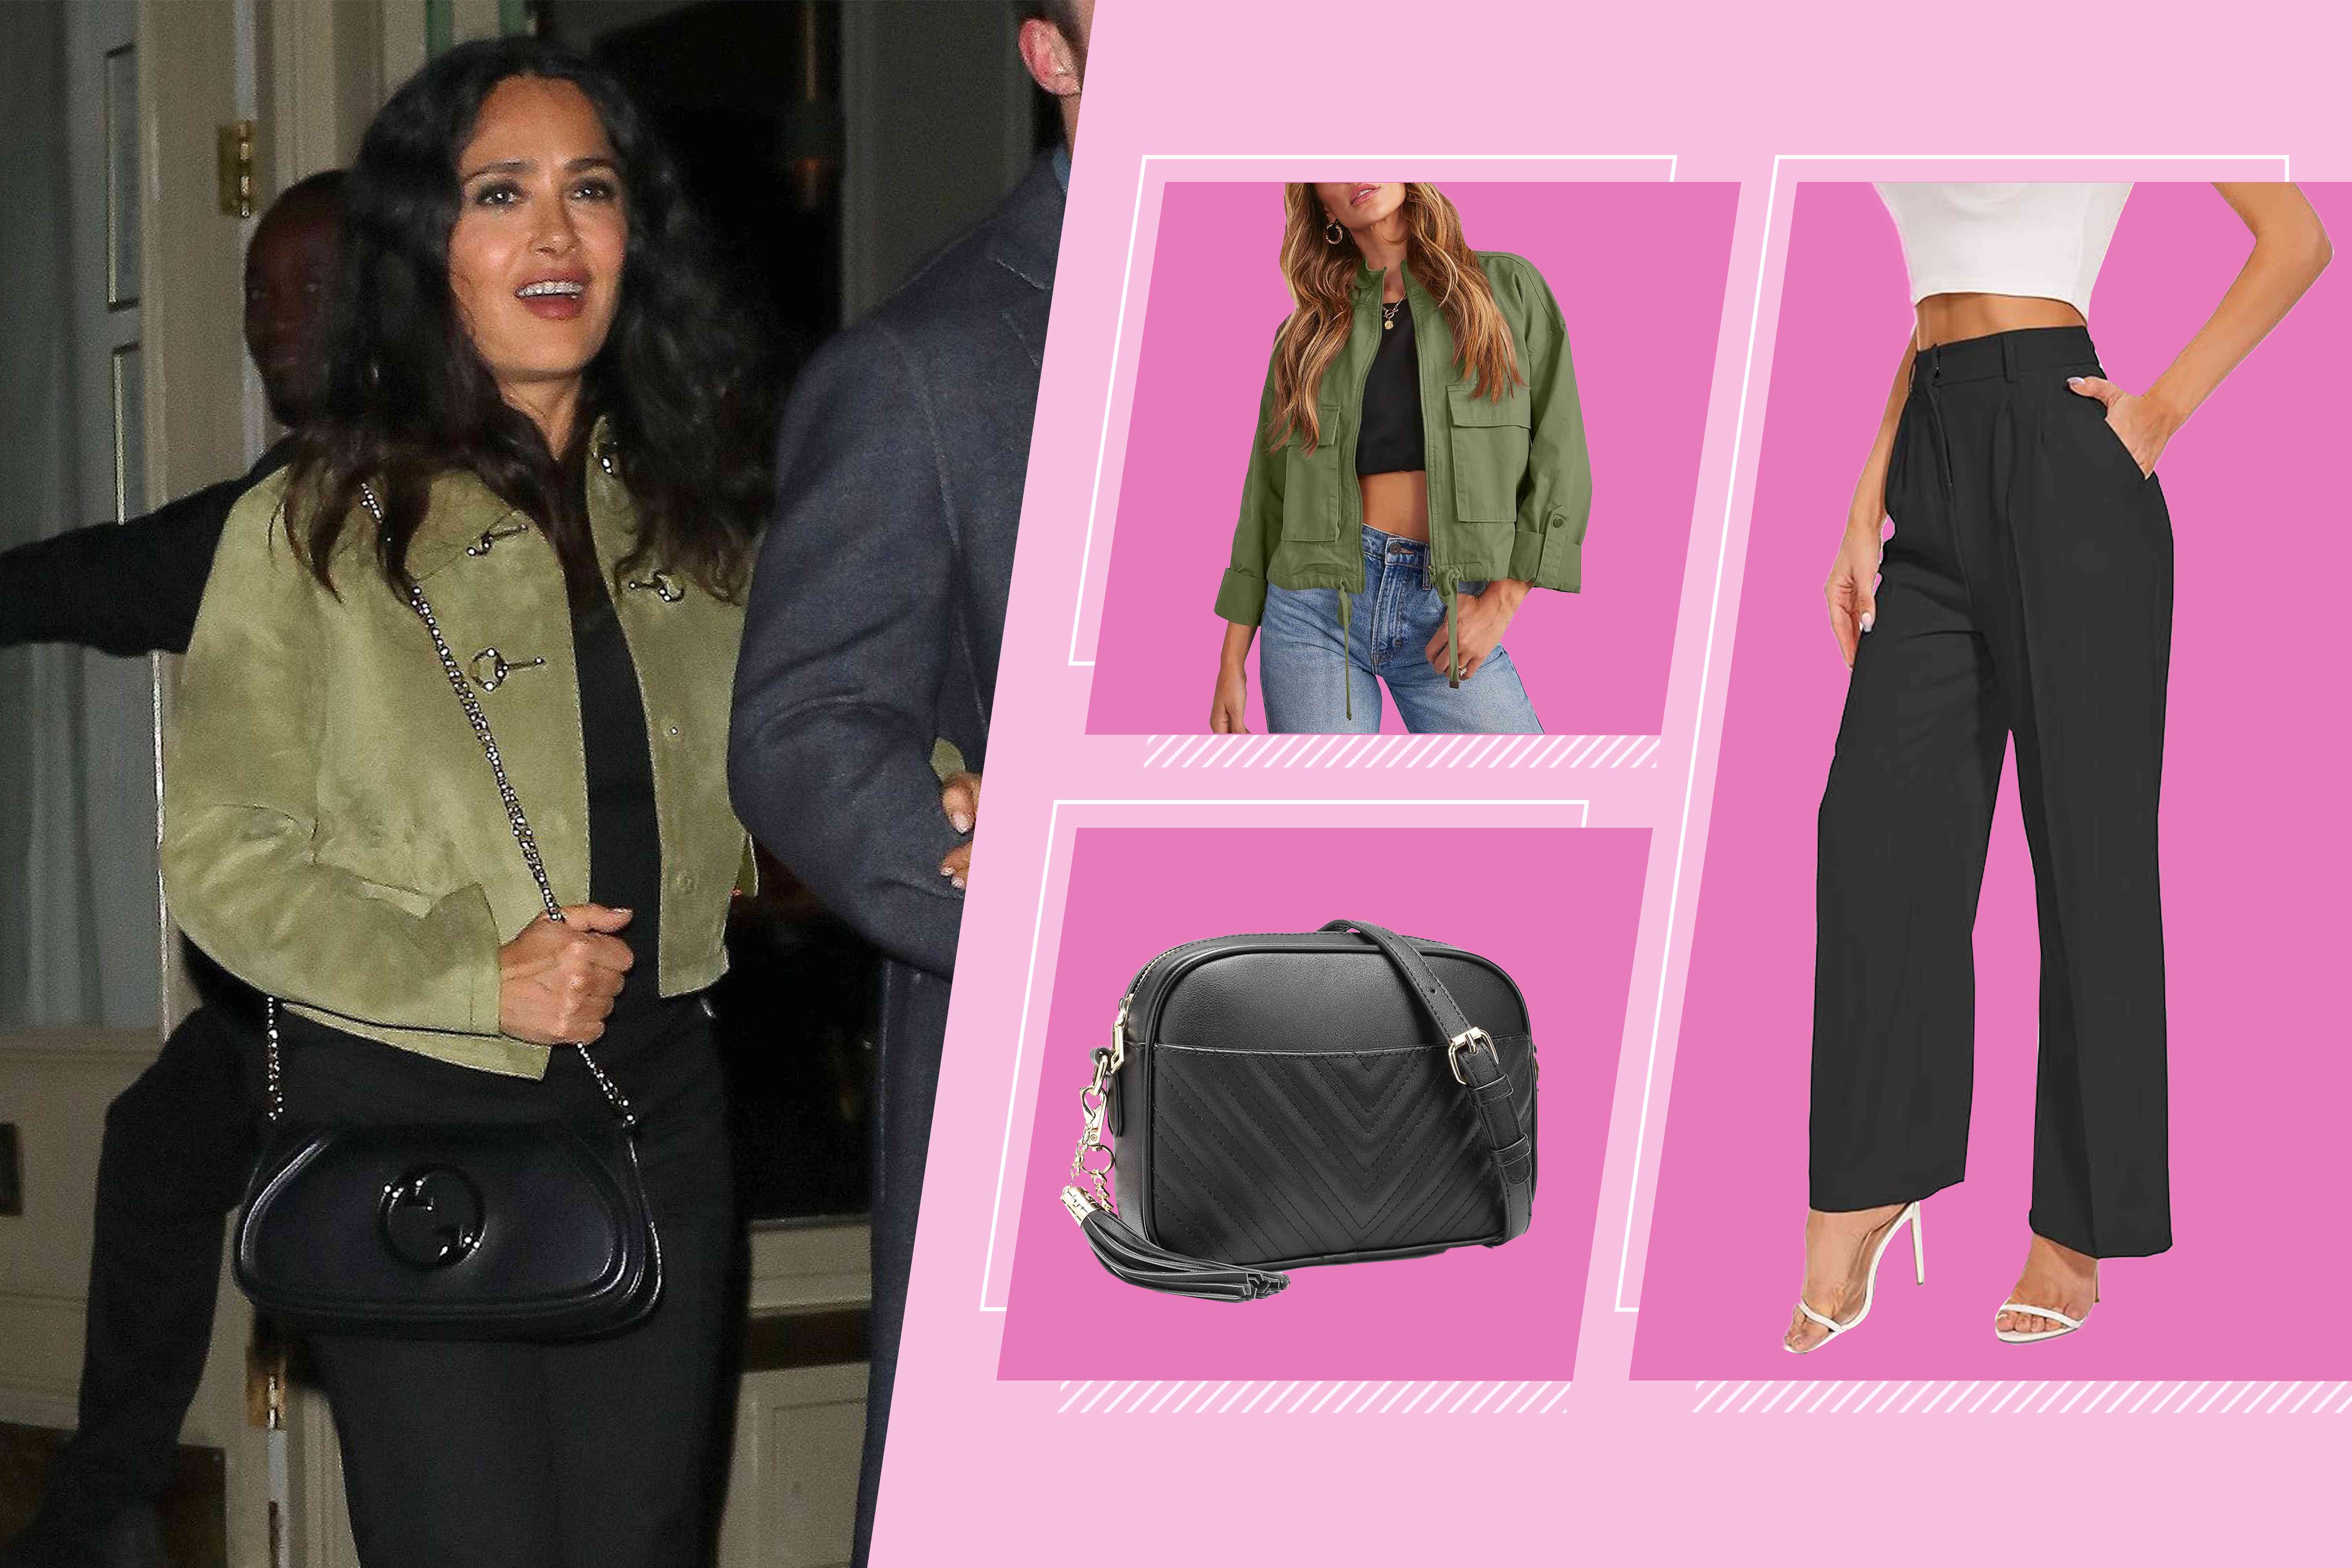 Salma Hayek Just Persuaded Us to Ditch Our Denim Jacket for This Style Instead — Shop Lookalikes Under $40